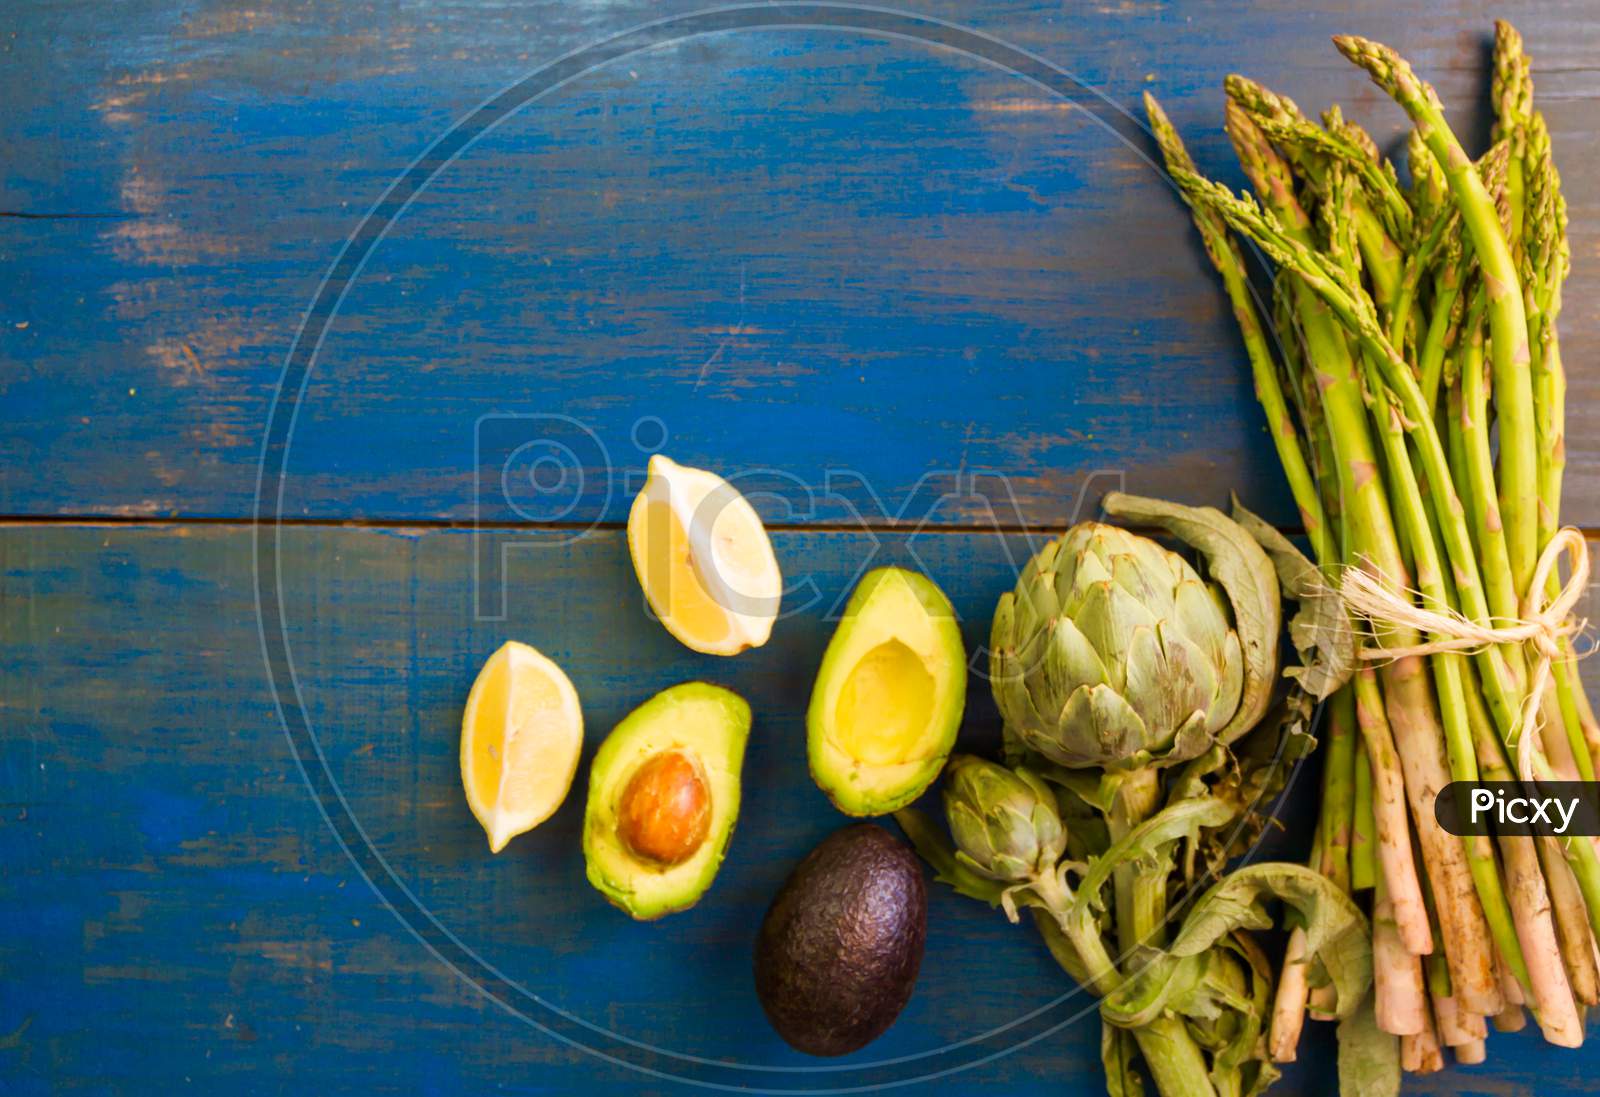 Artichoke Avocados And Asparagus On Blue Rustic Background